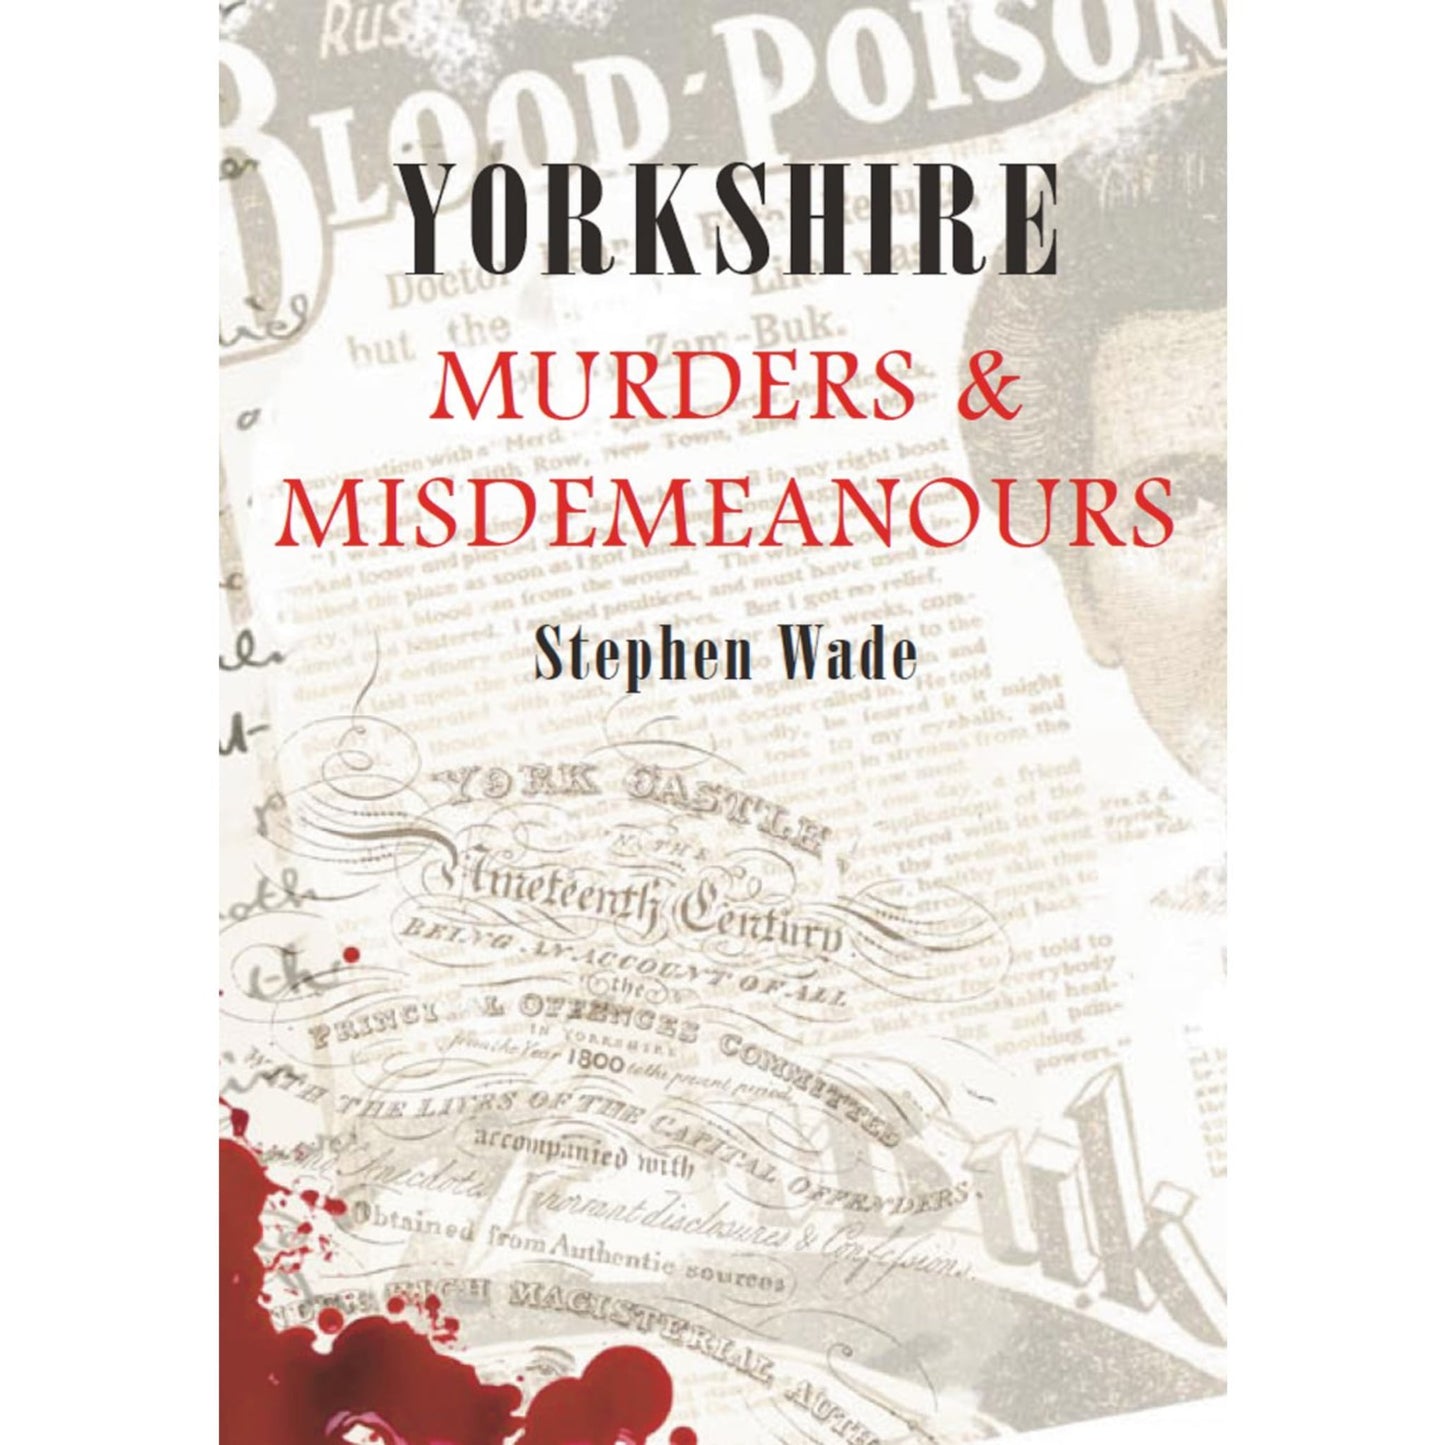 Yorkshire Murders & Misdemeanours Book - The Great Yorkshire Shop